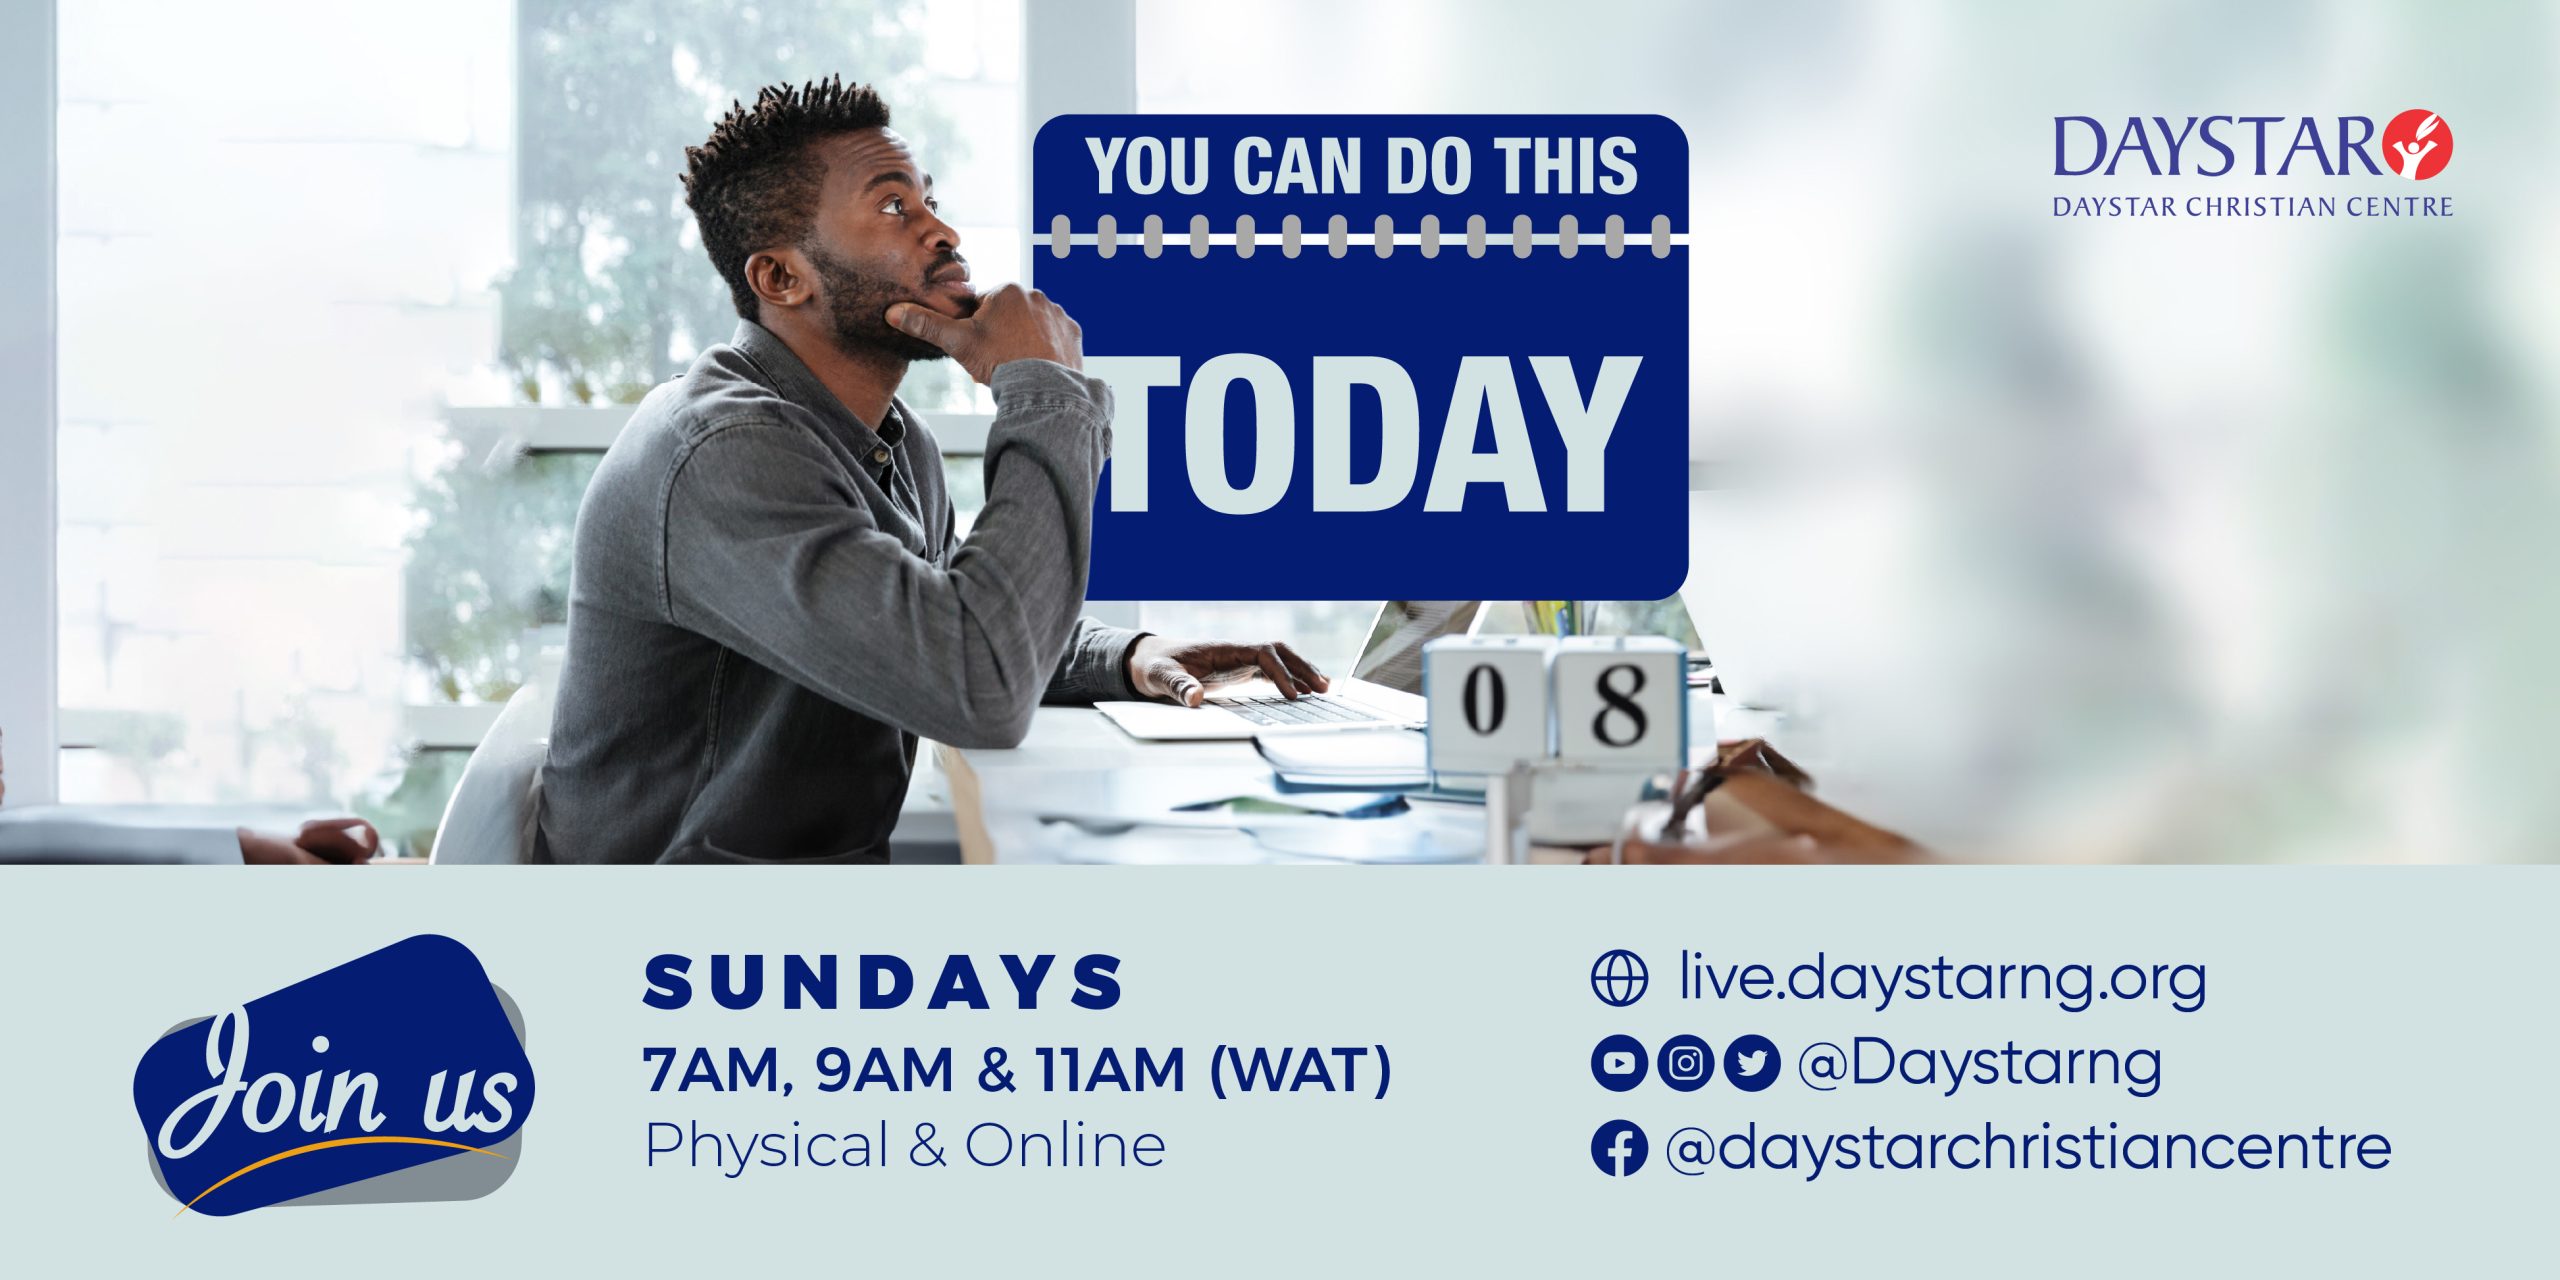 You Can Do This Today! | Daystar Christian Centre